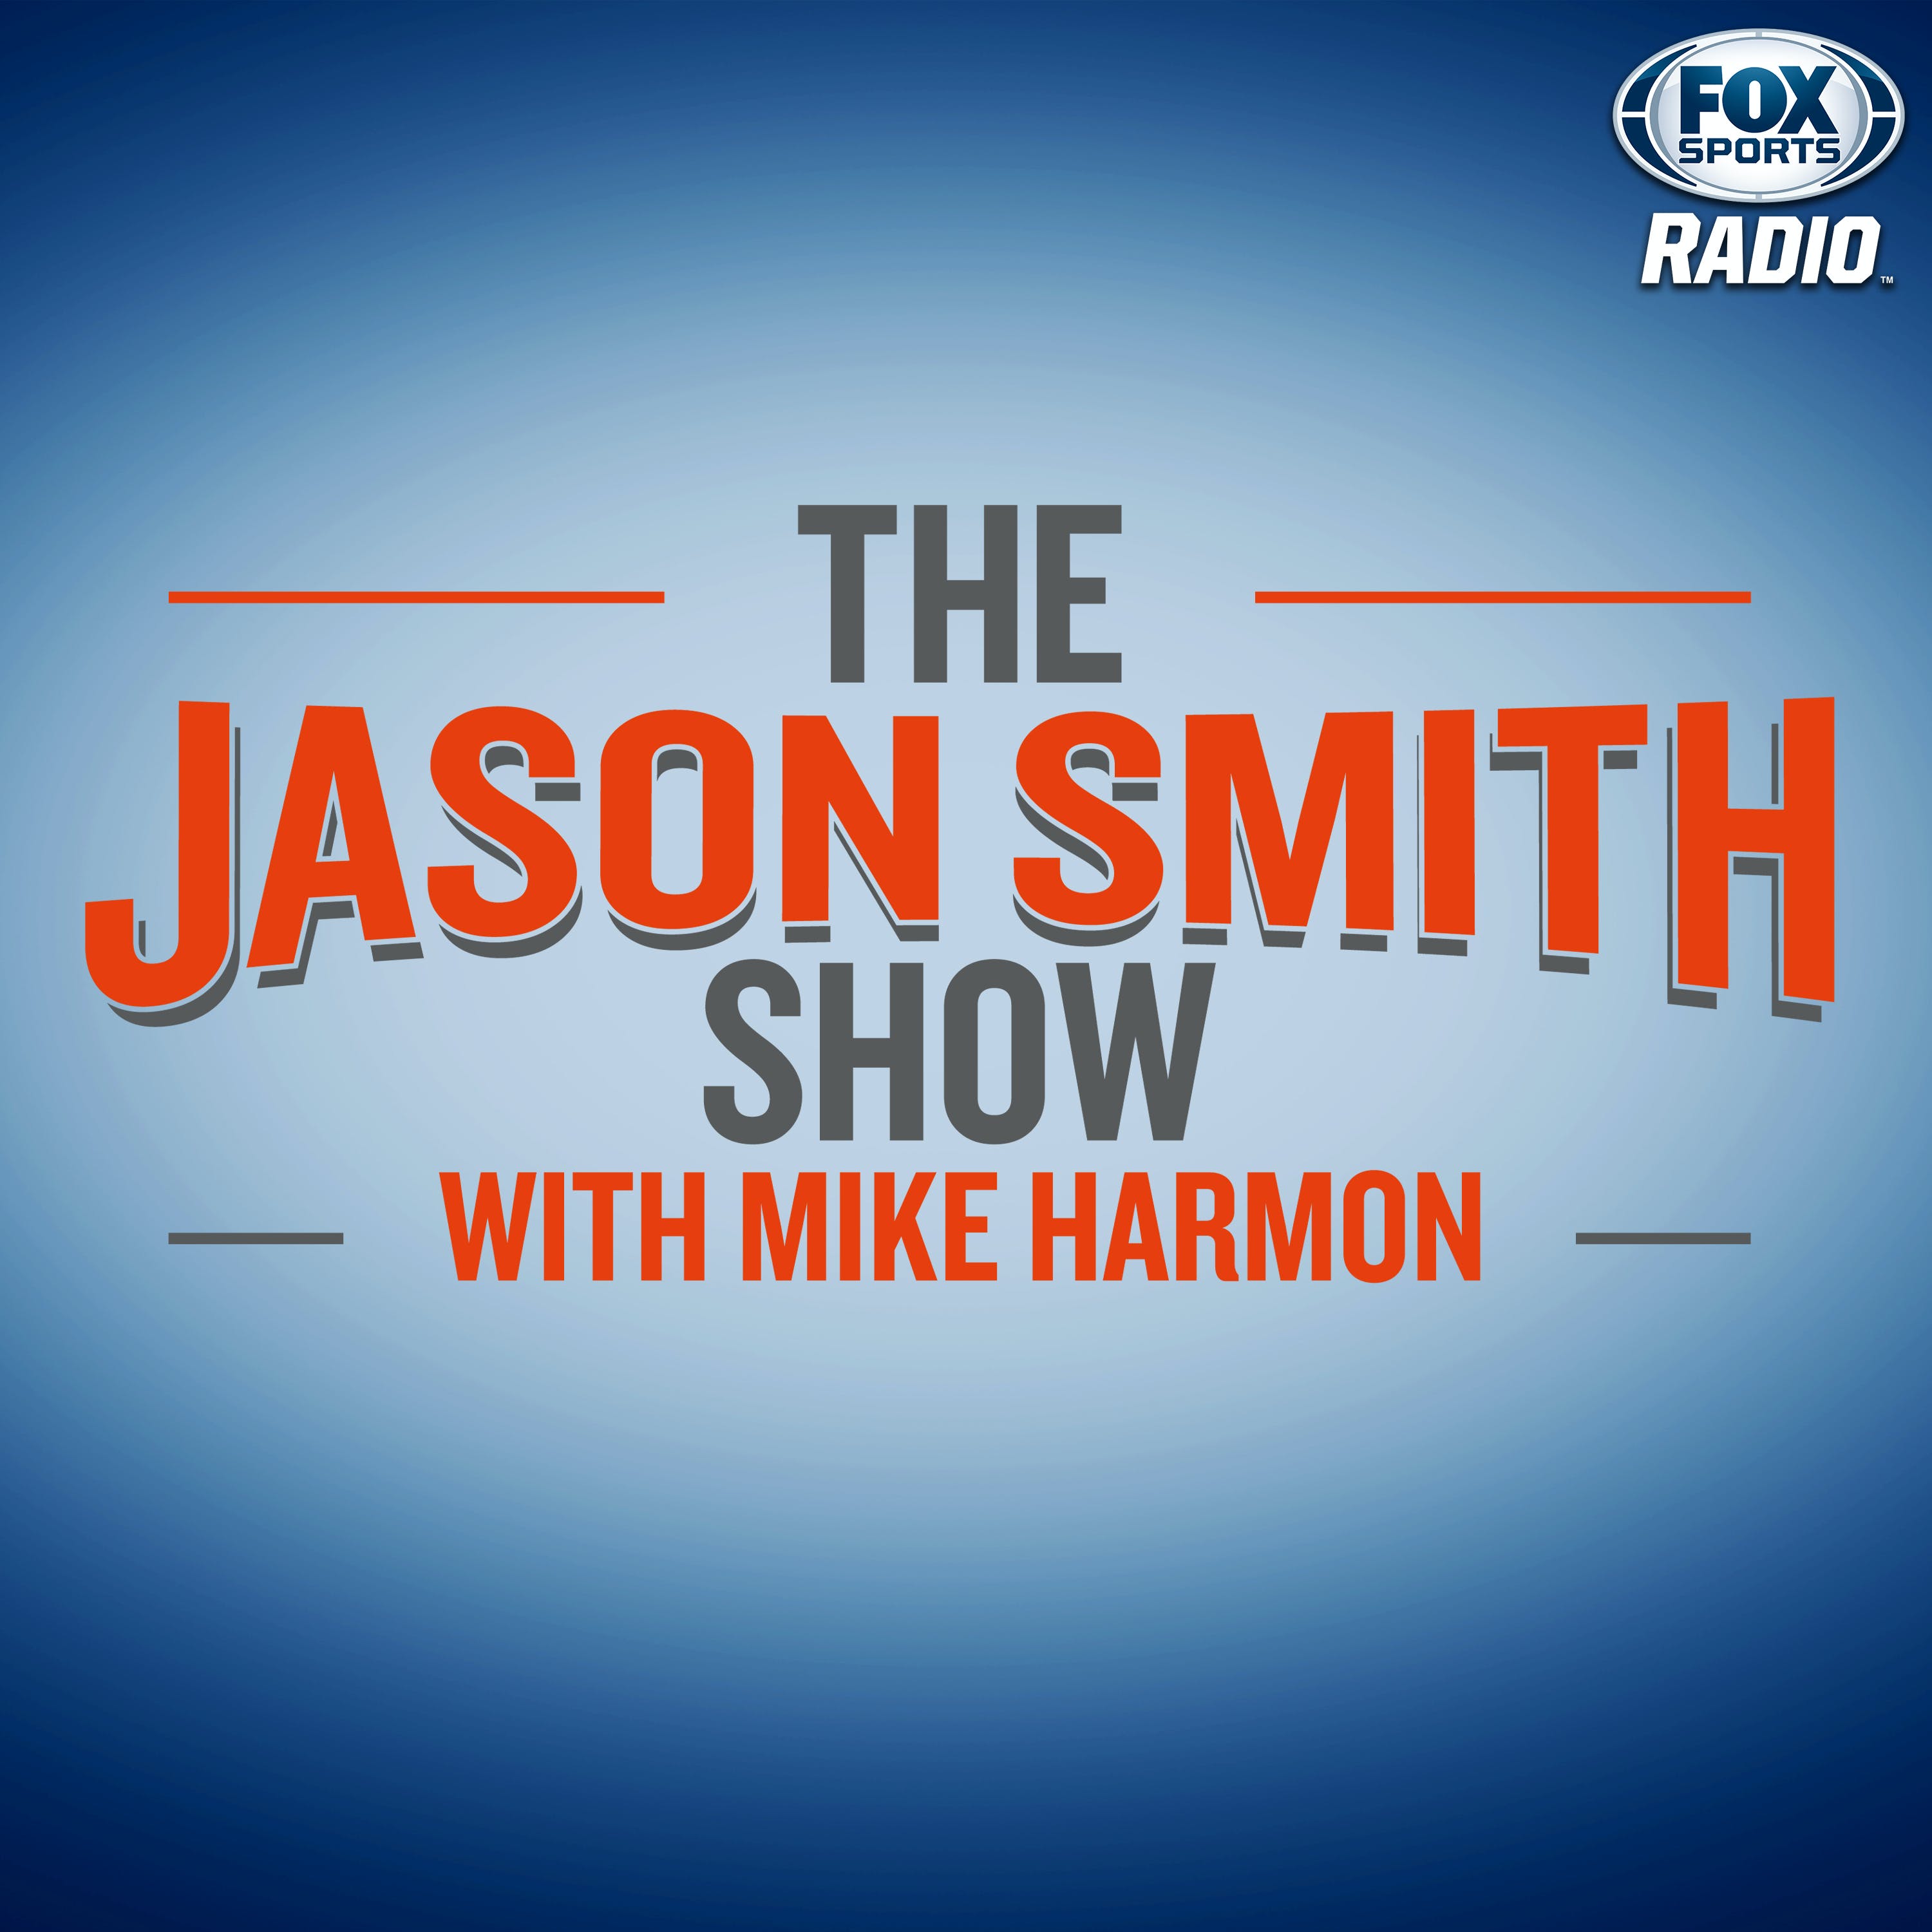 09/21/2021 - Best of The Jason Smith Show with Mike Harmon